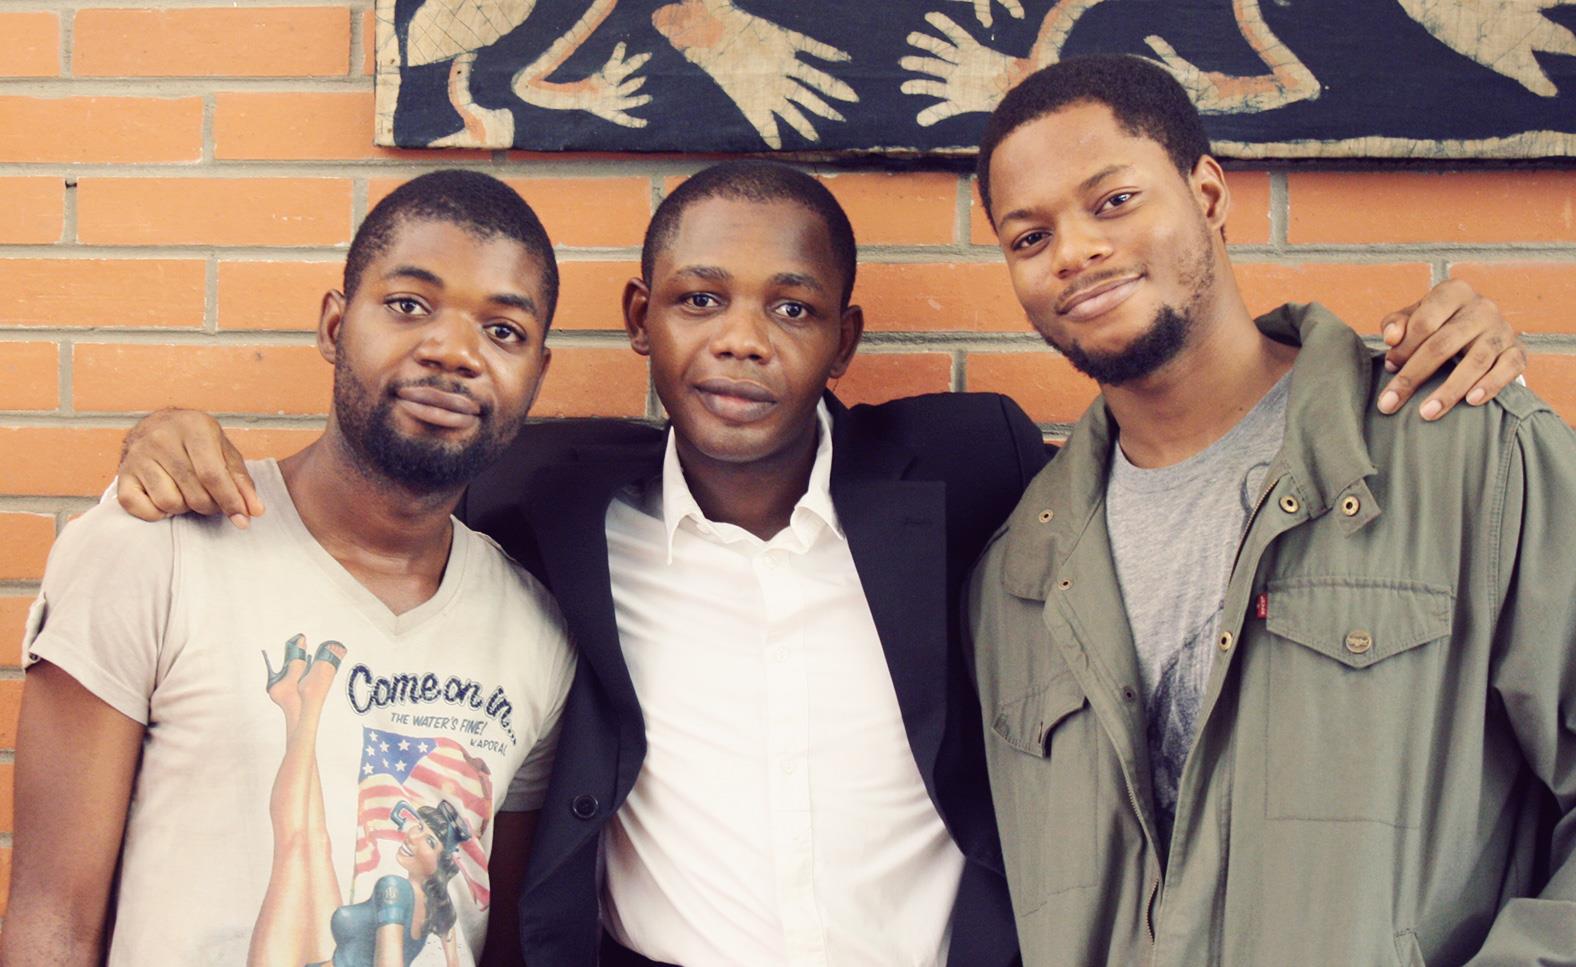 (Prowork team) L-R: Ope, Francis and Namzo